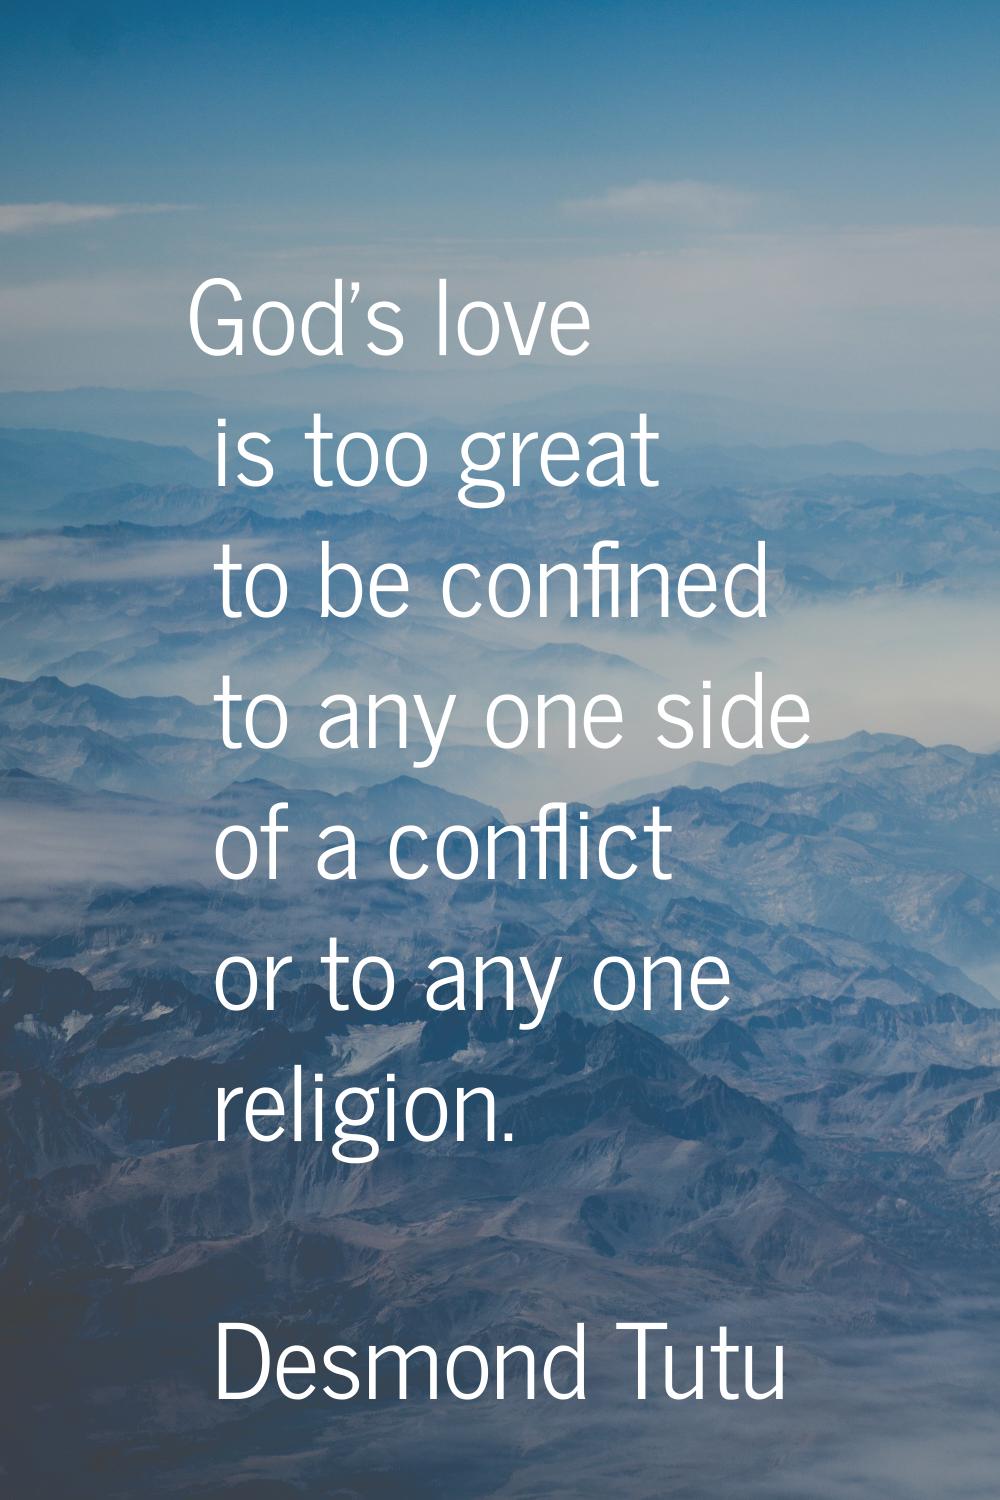 God's love is too great to be confined to any one side of a conflict or to any one religion.